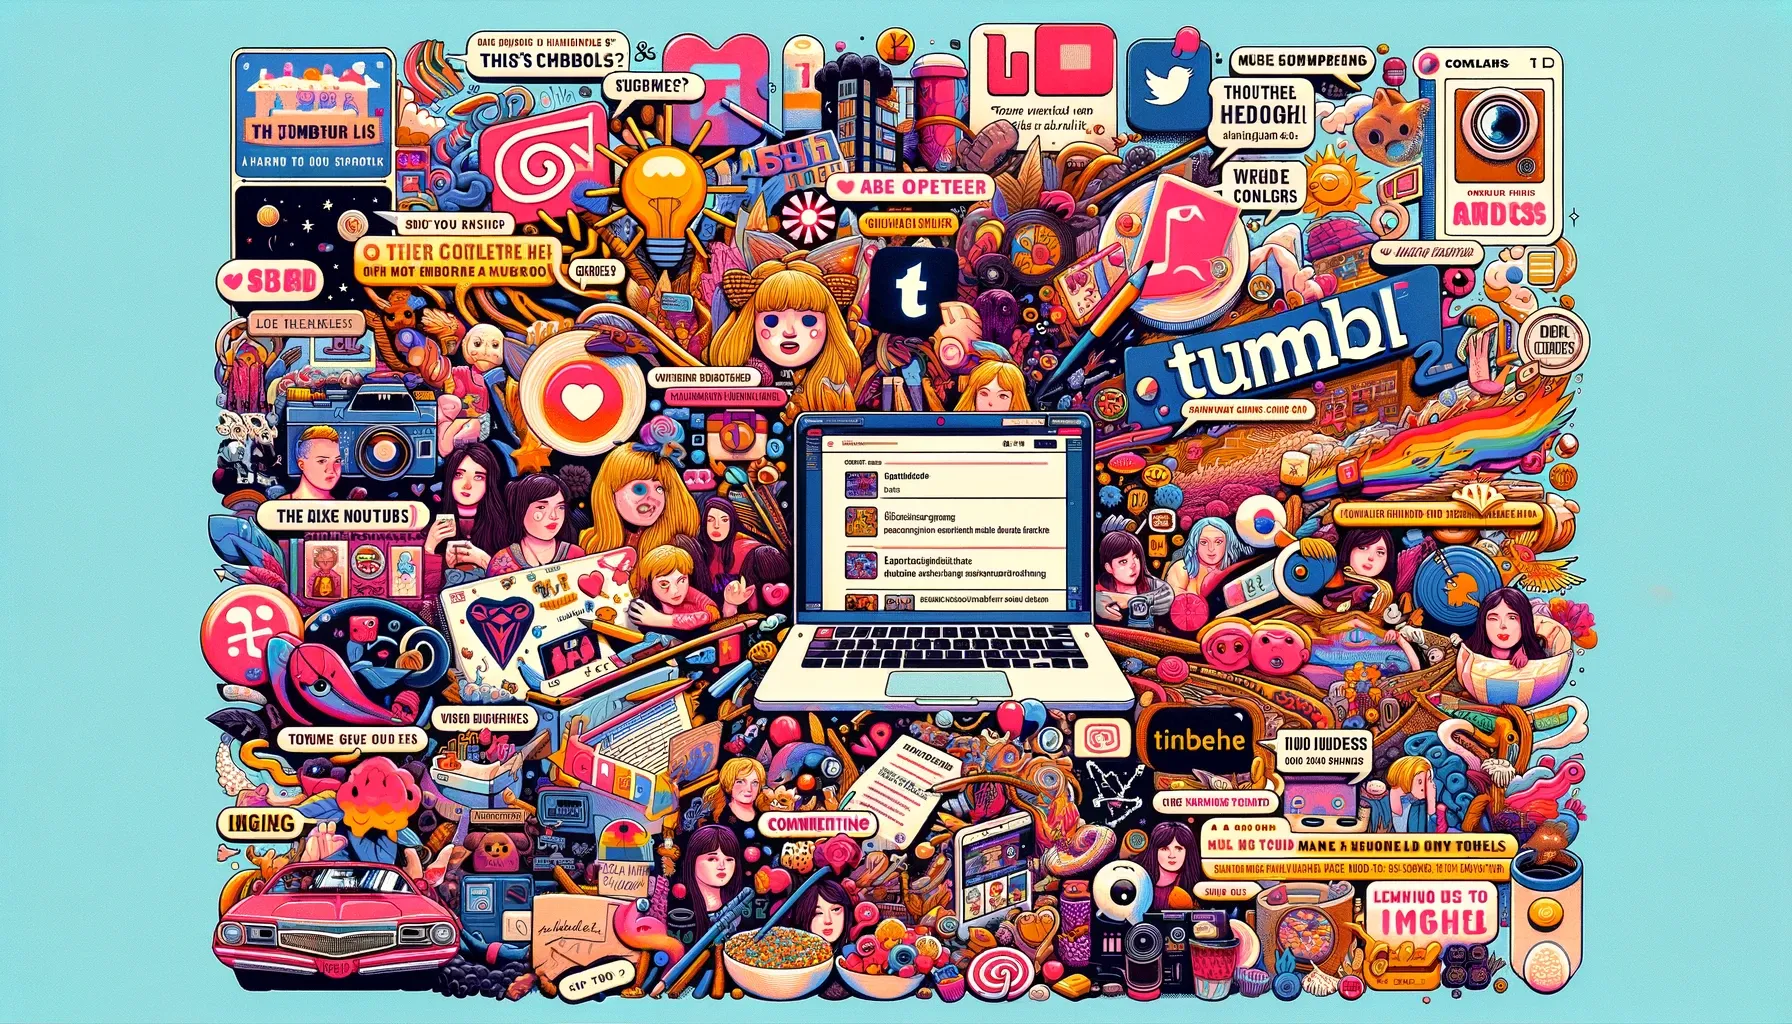 Is Tumblr Used for Dating a Girl? Truth Behind